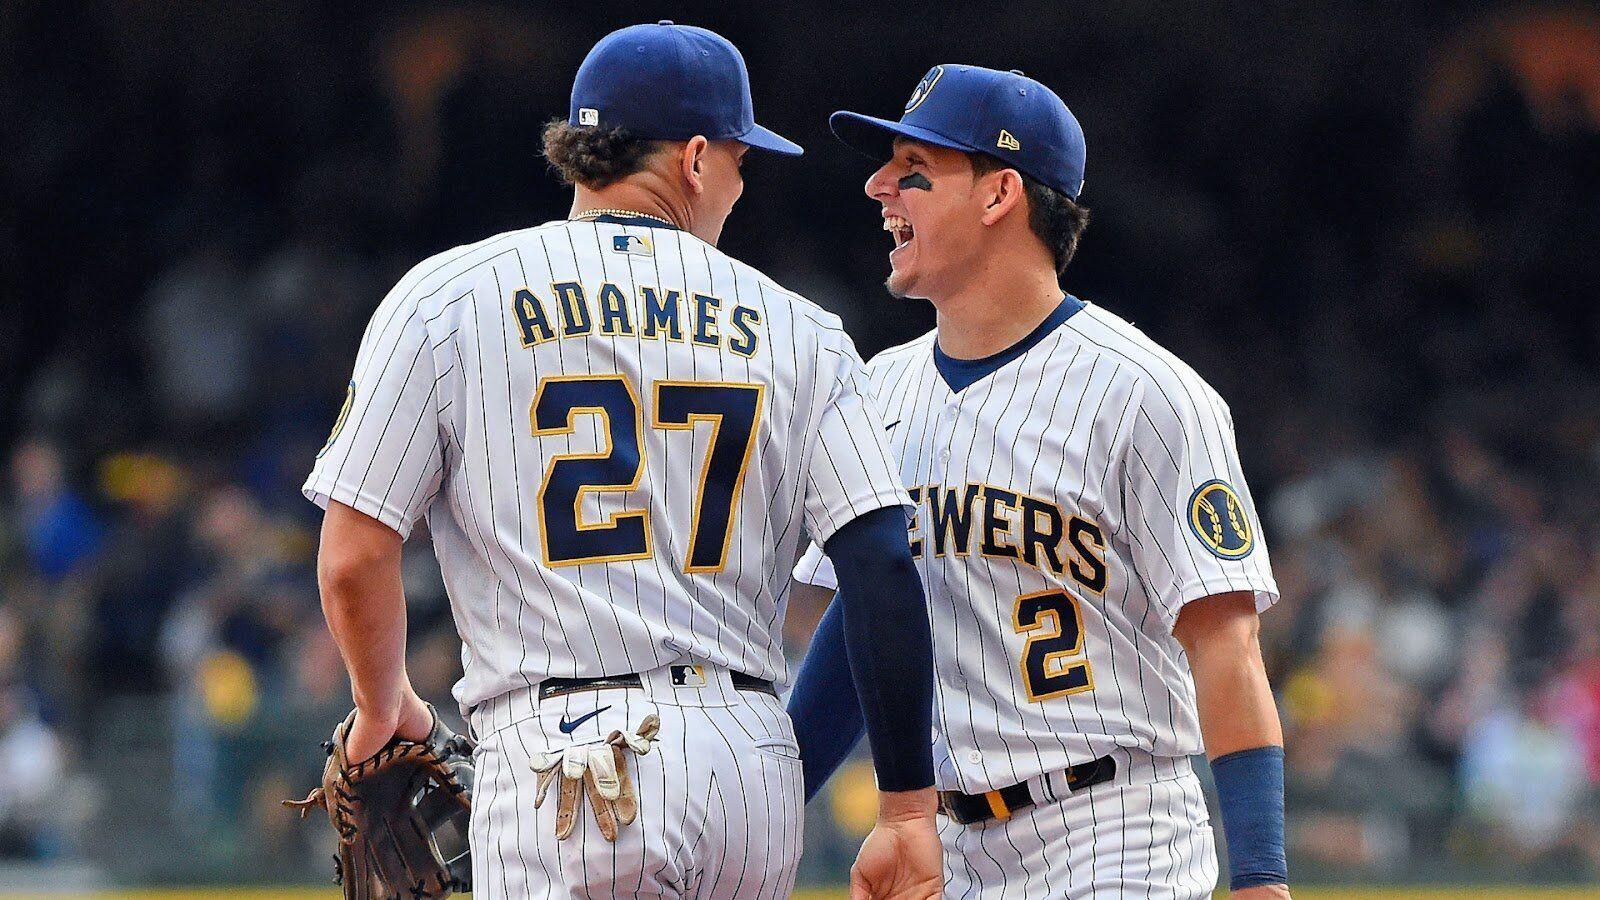 How players from the Brewers system fared in the World Baseball